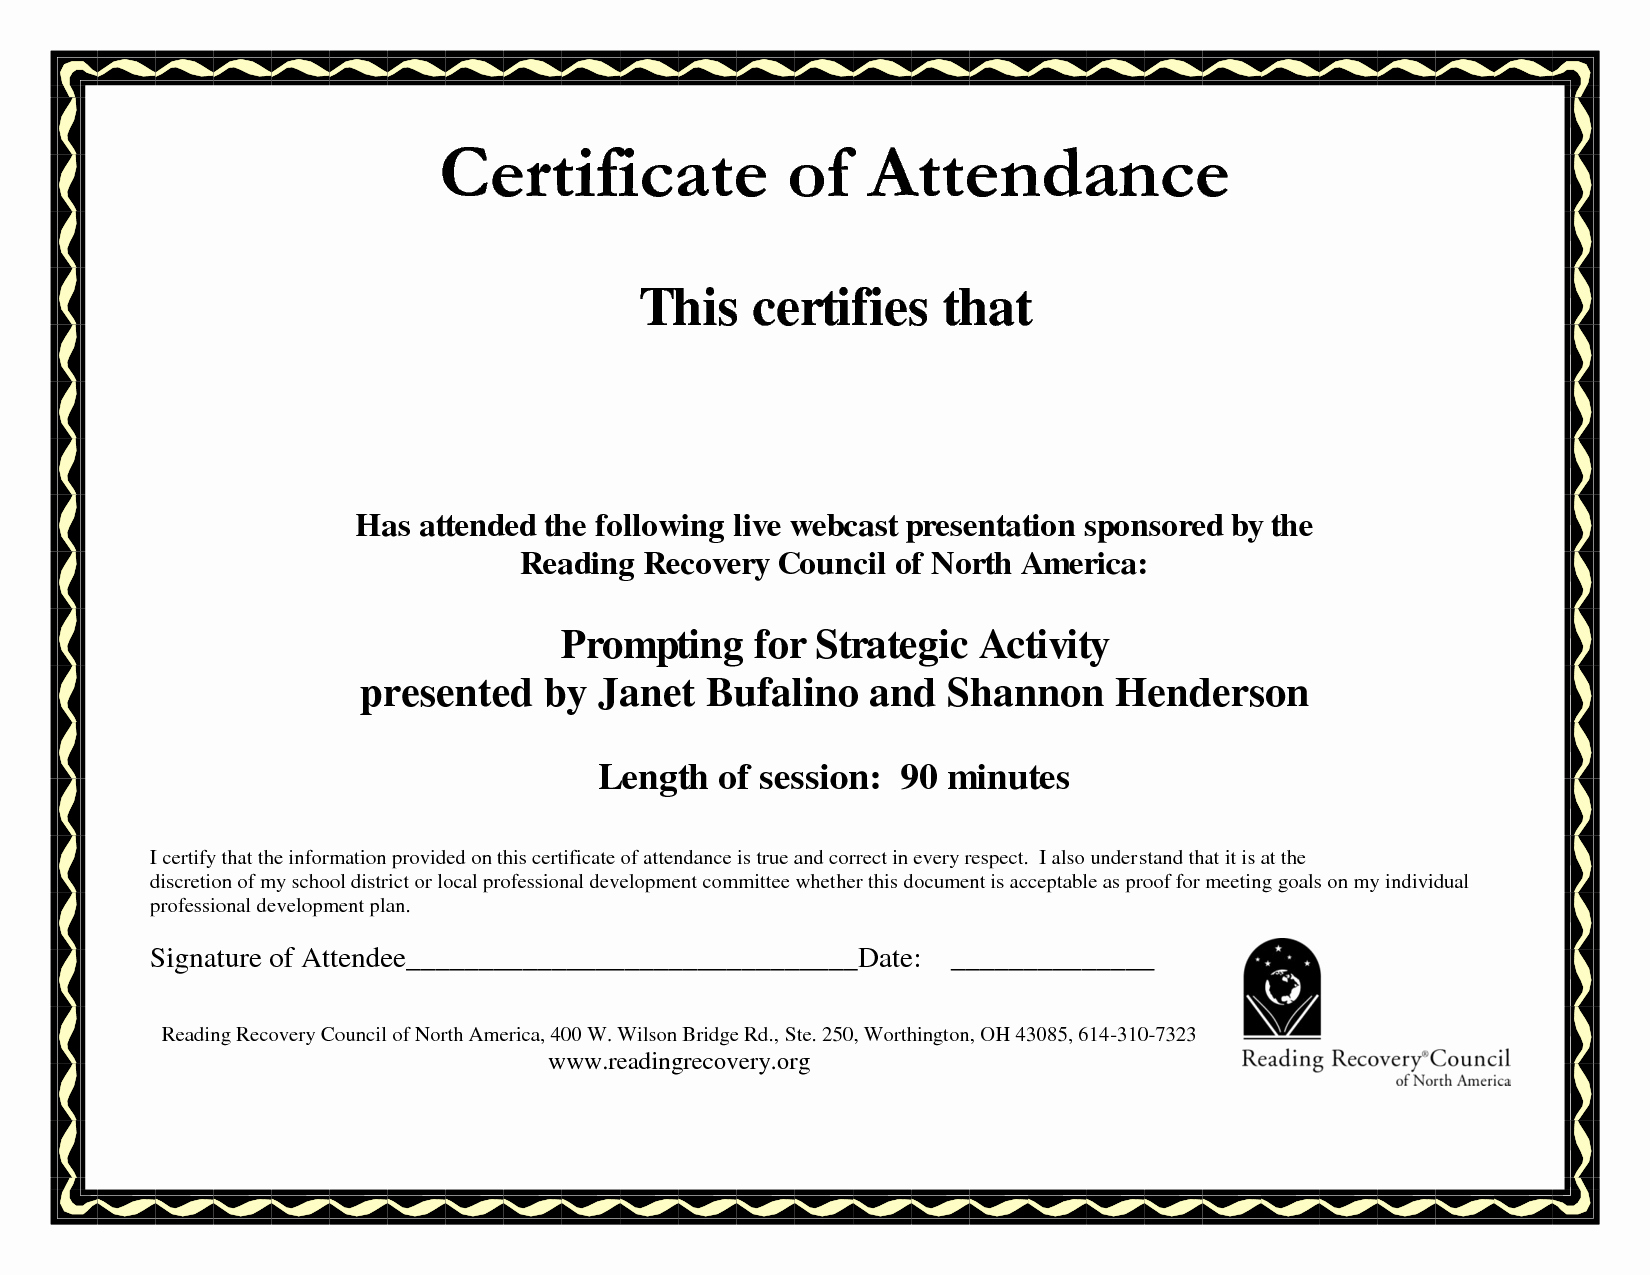 30 Ceu Certificate Of Attendance Template | Pryncepality Pertaining To Conference Certificate Of Attendance Template